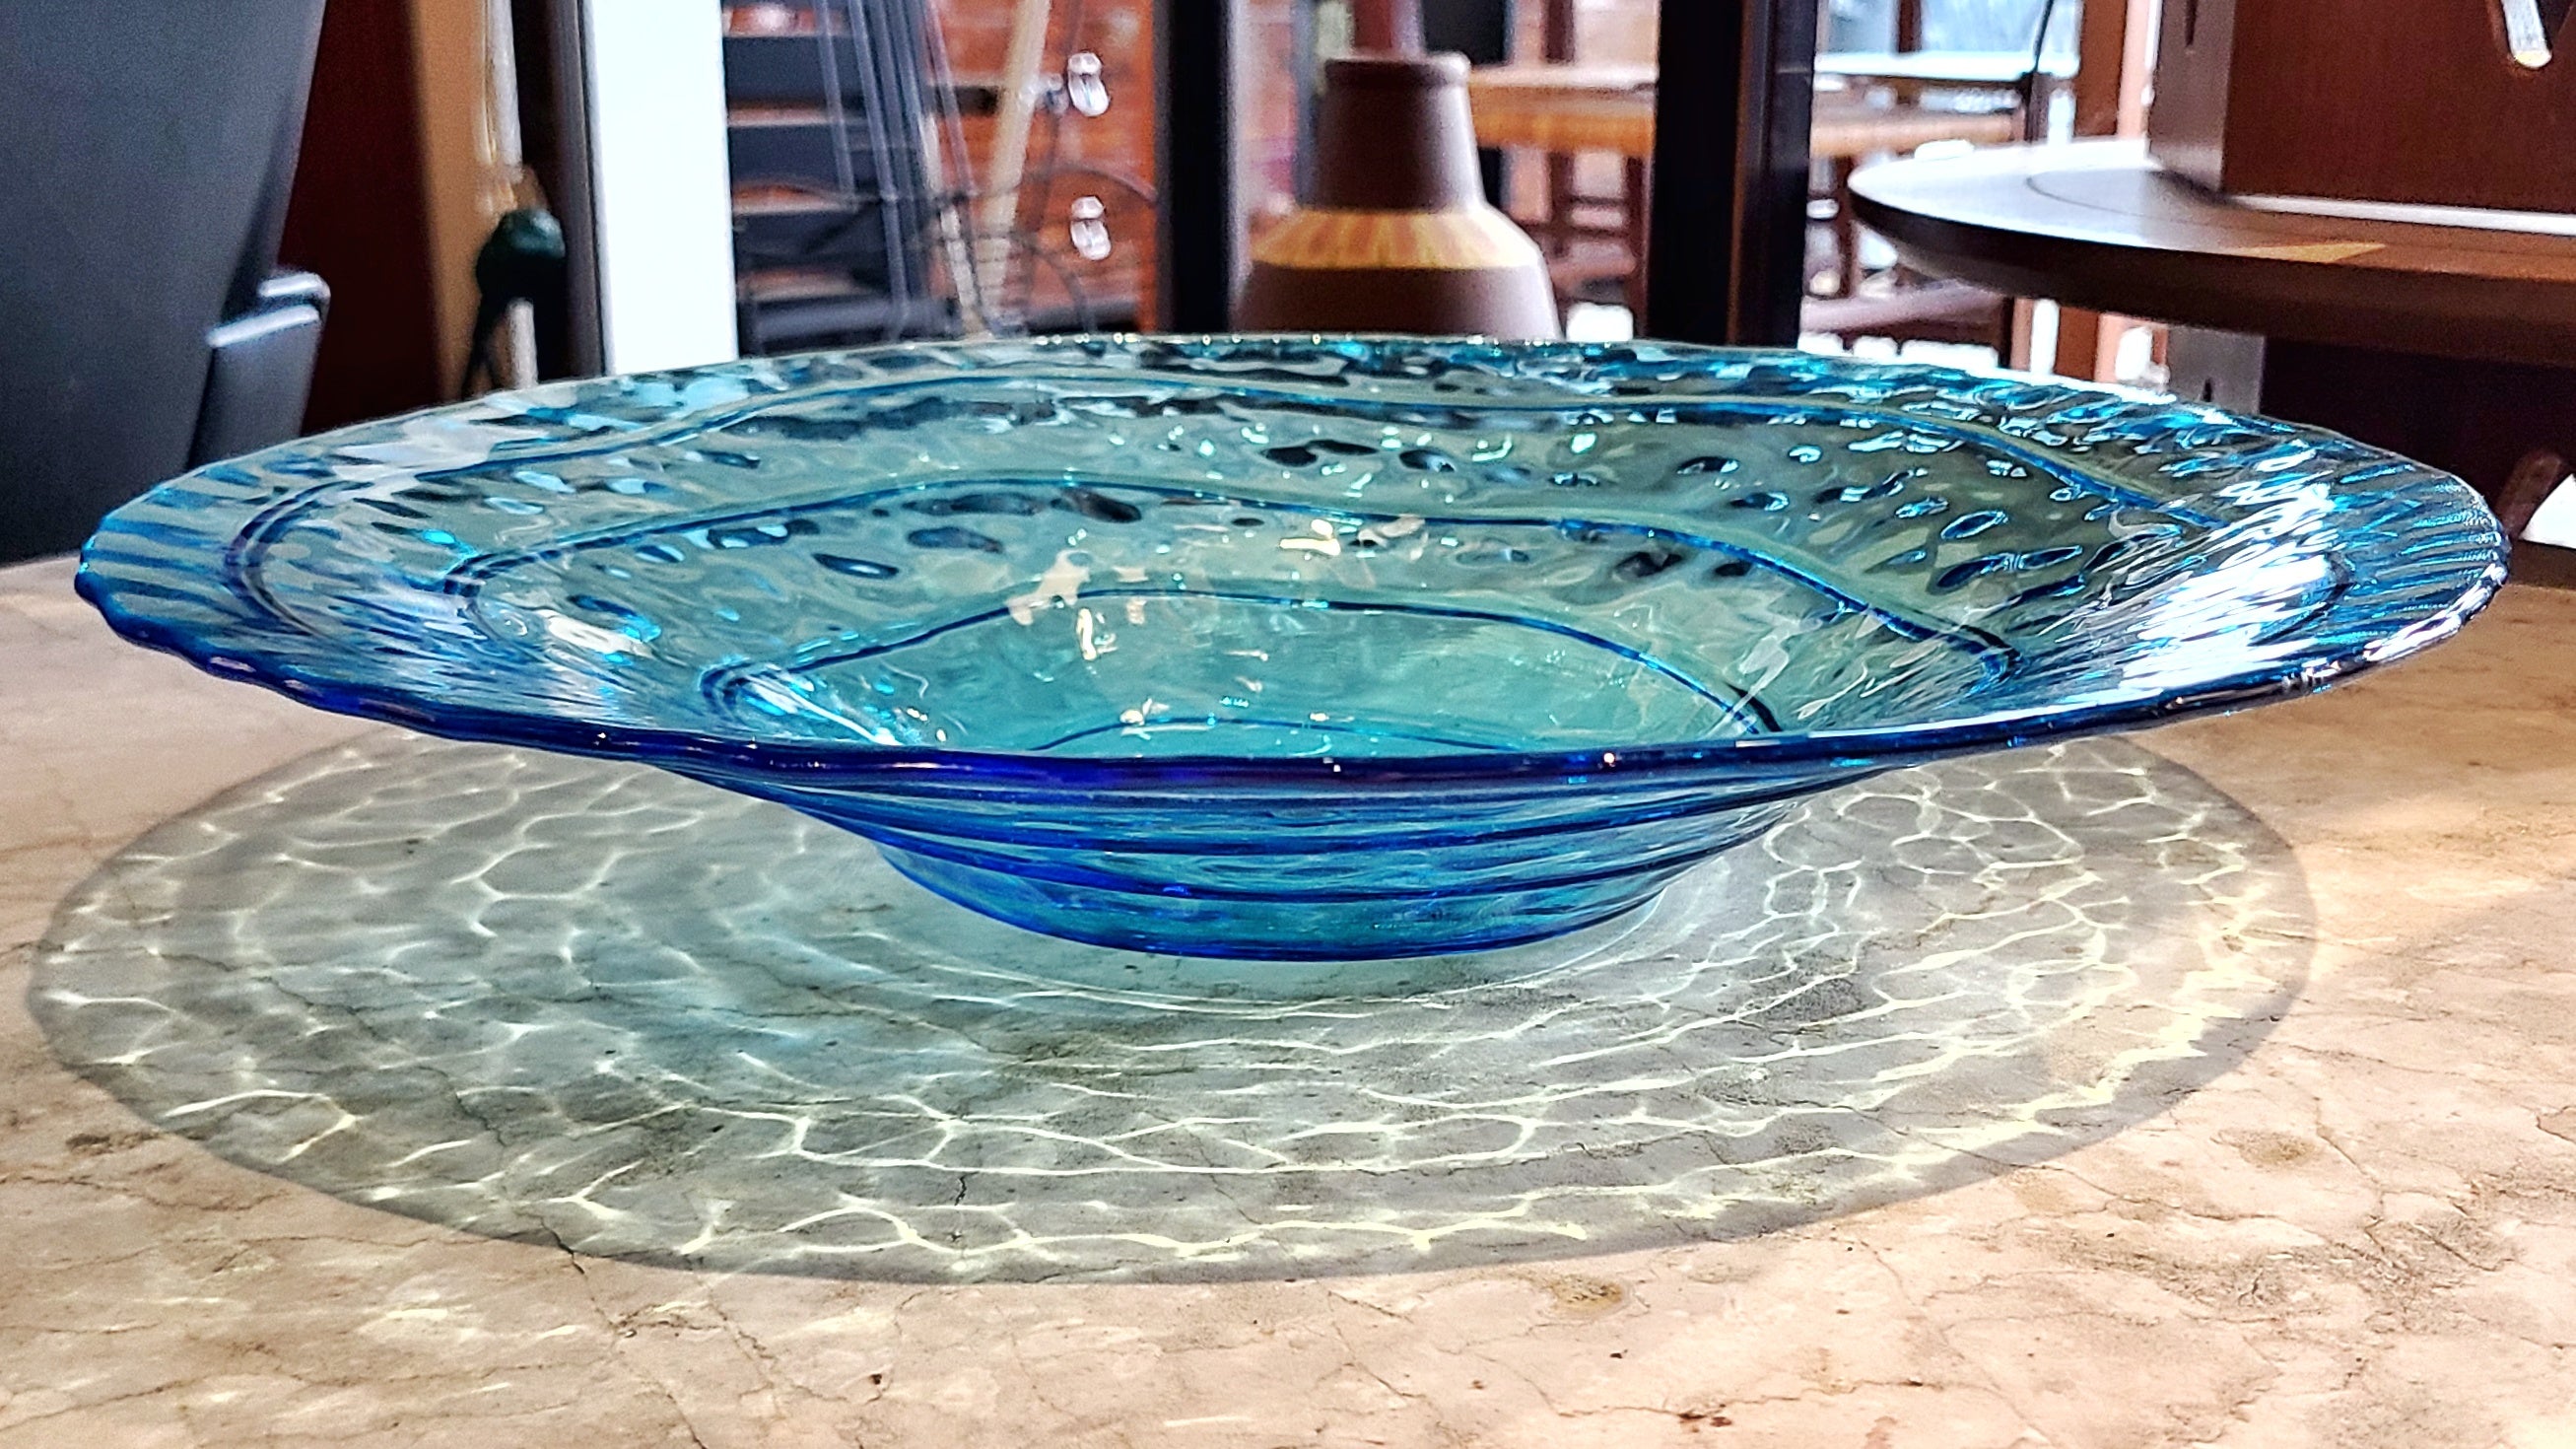 LARGE ART GLASS BOWL WITH WAVY CONCENTRIC RINGS